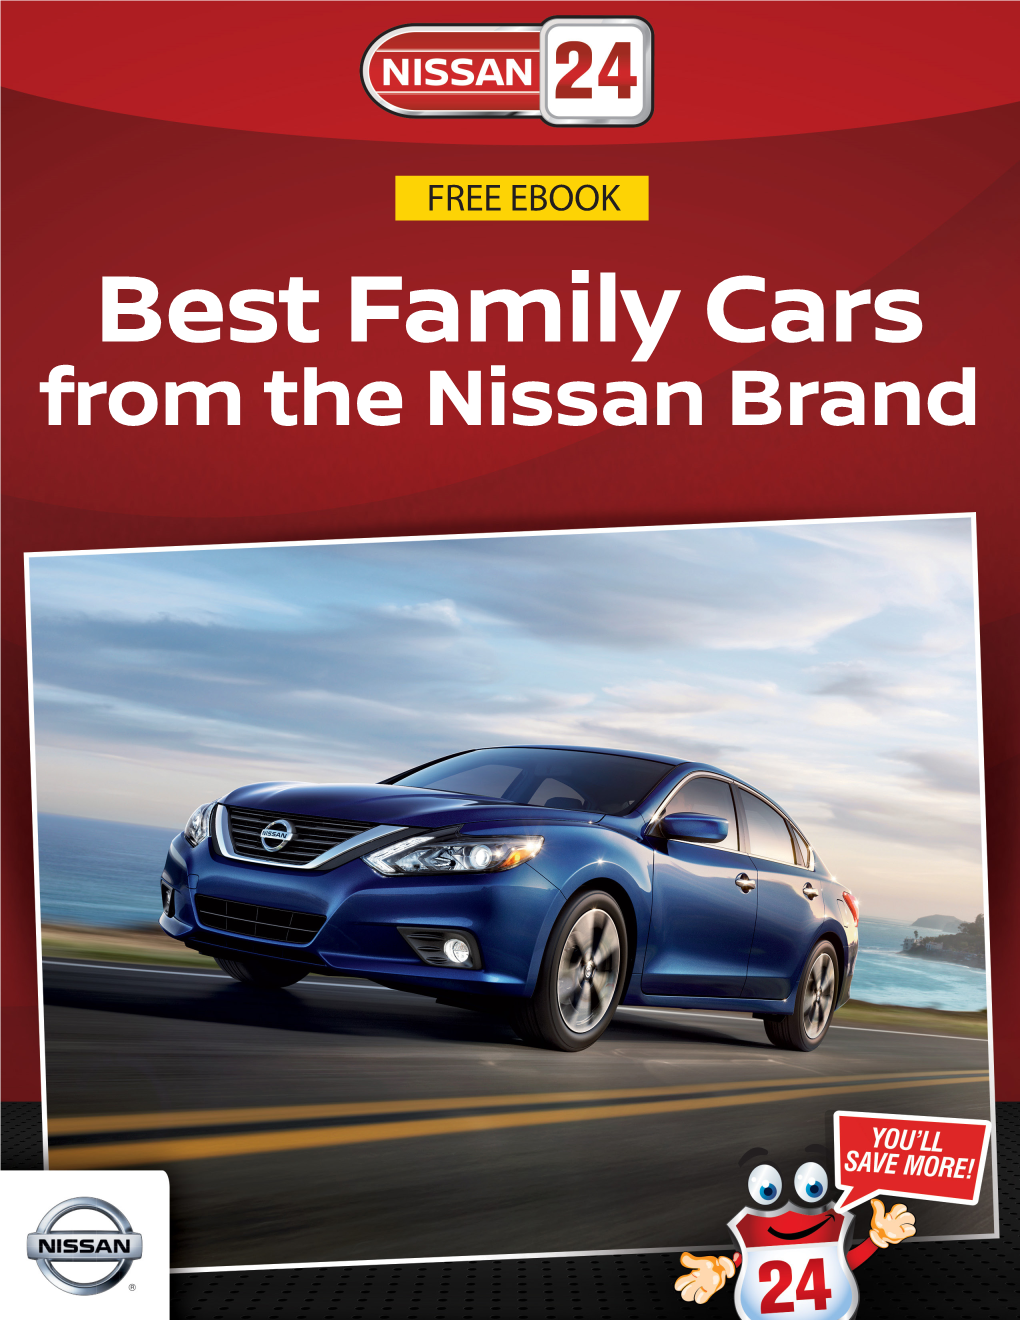 Best Family Cars from the Nissan Brand